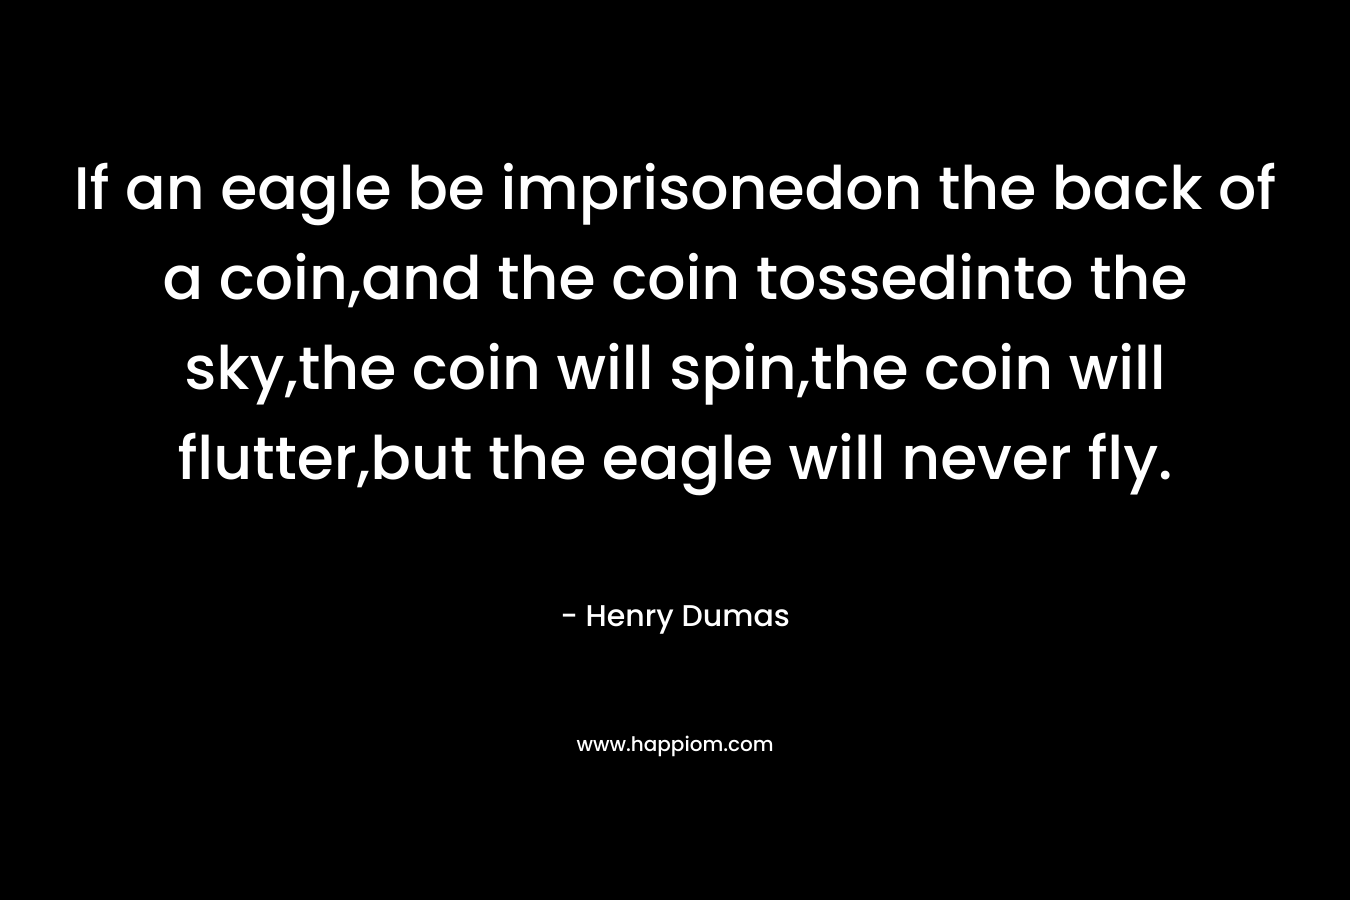 If an eagle be imprisonedon the back of a coin,and the coin tossedinto the sky,the coin will spin,the coin will flutter,but the eagle will never fly. – Henry Dumas